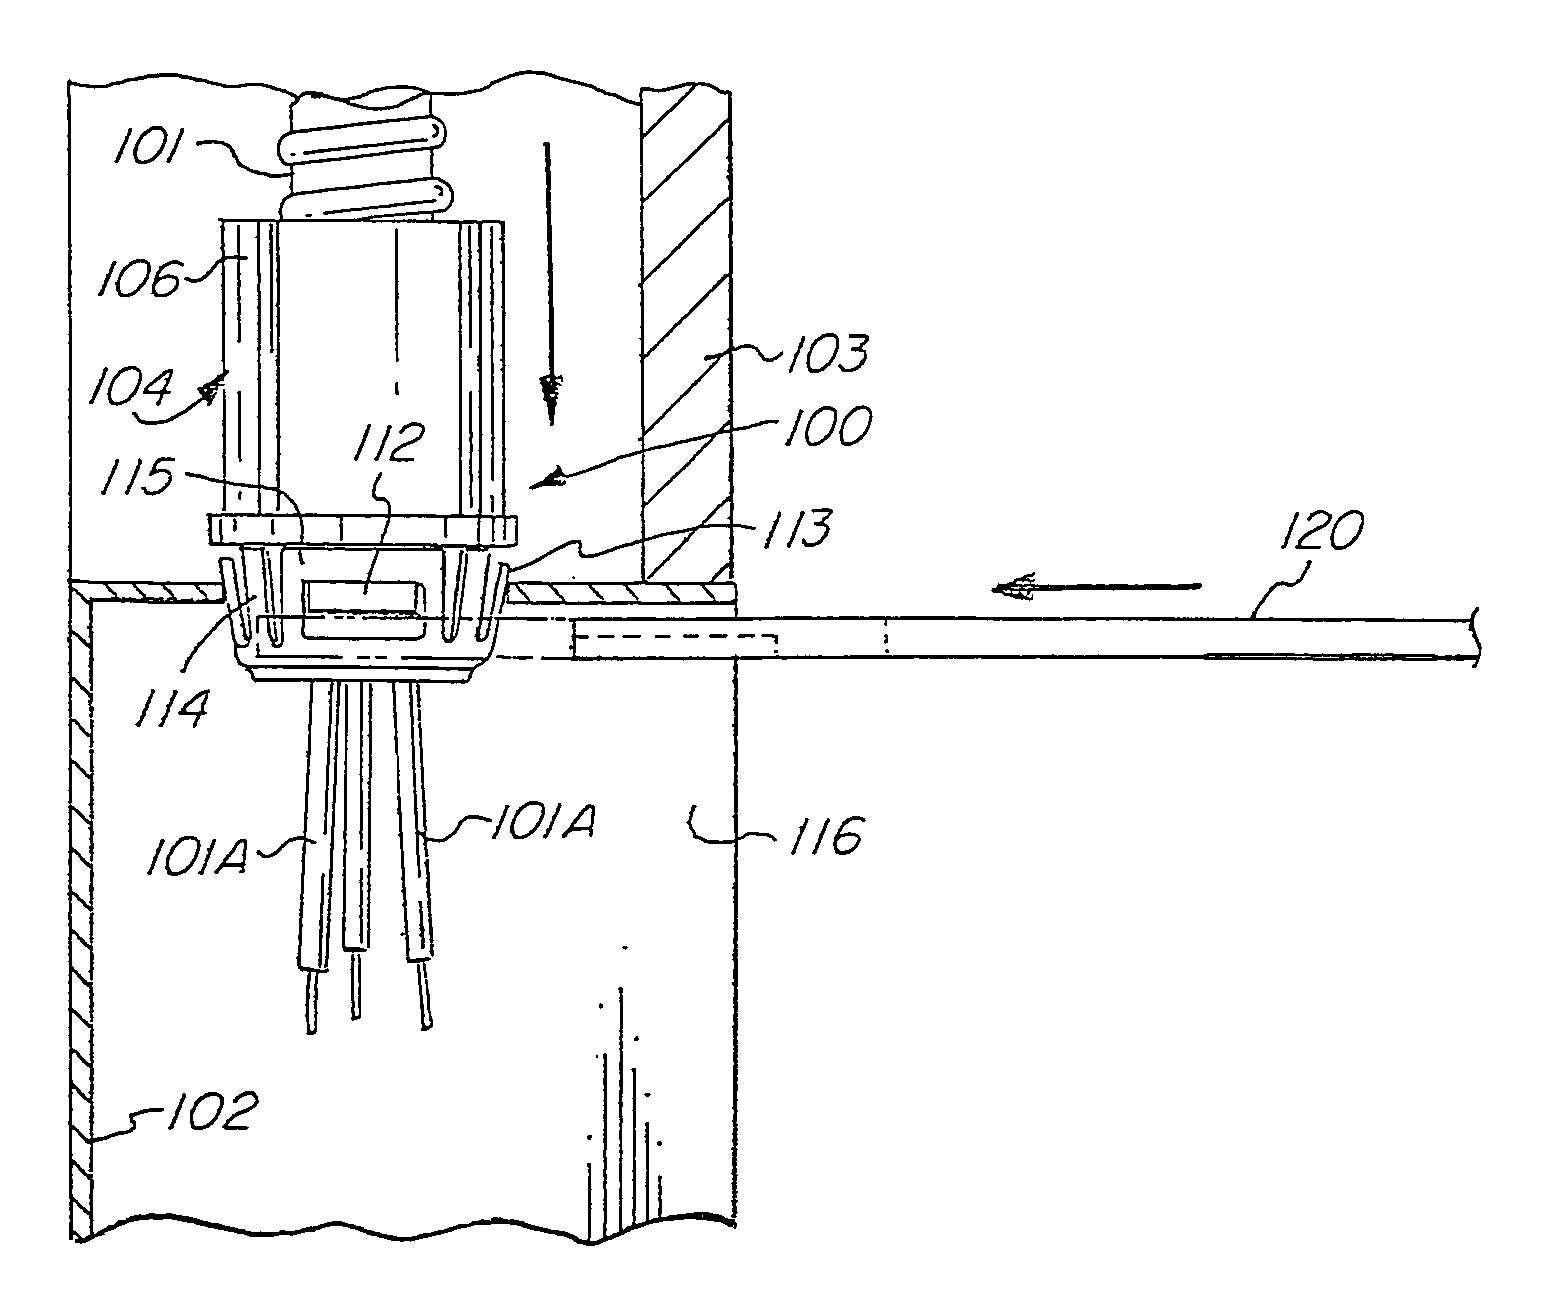 Electrical connector assembly with frusto-conical snap fit retaining ring for enhancing electrical grounding of the connector assembly to an electrical box and installation tool therefor